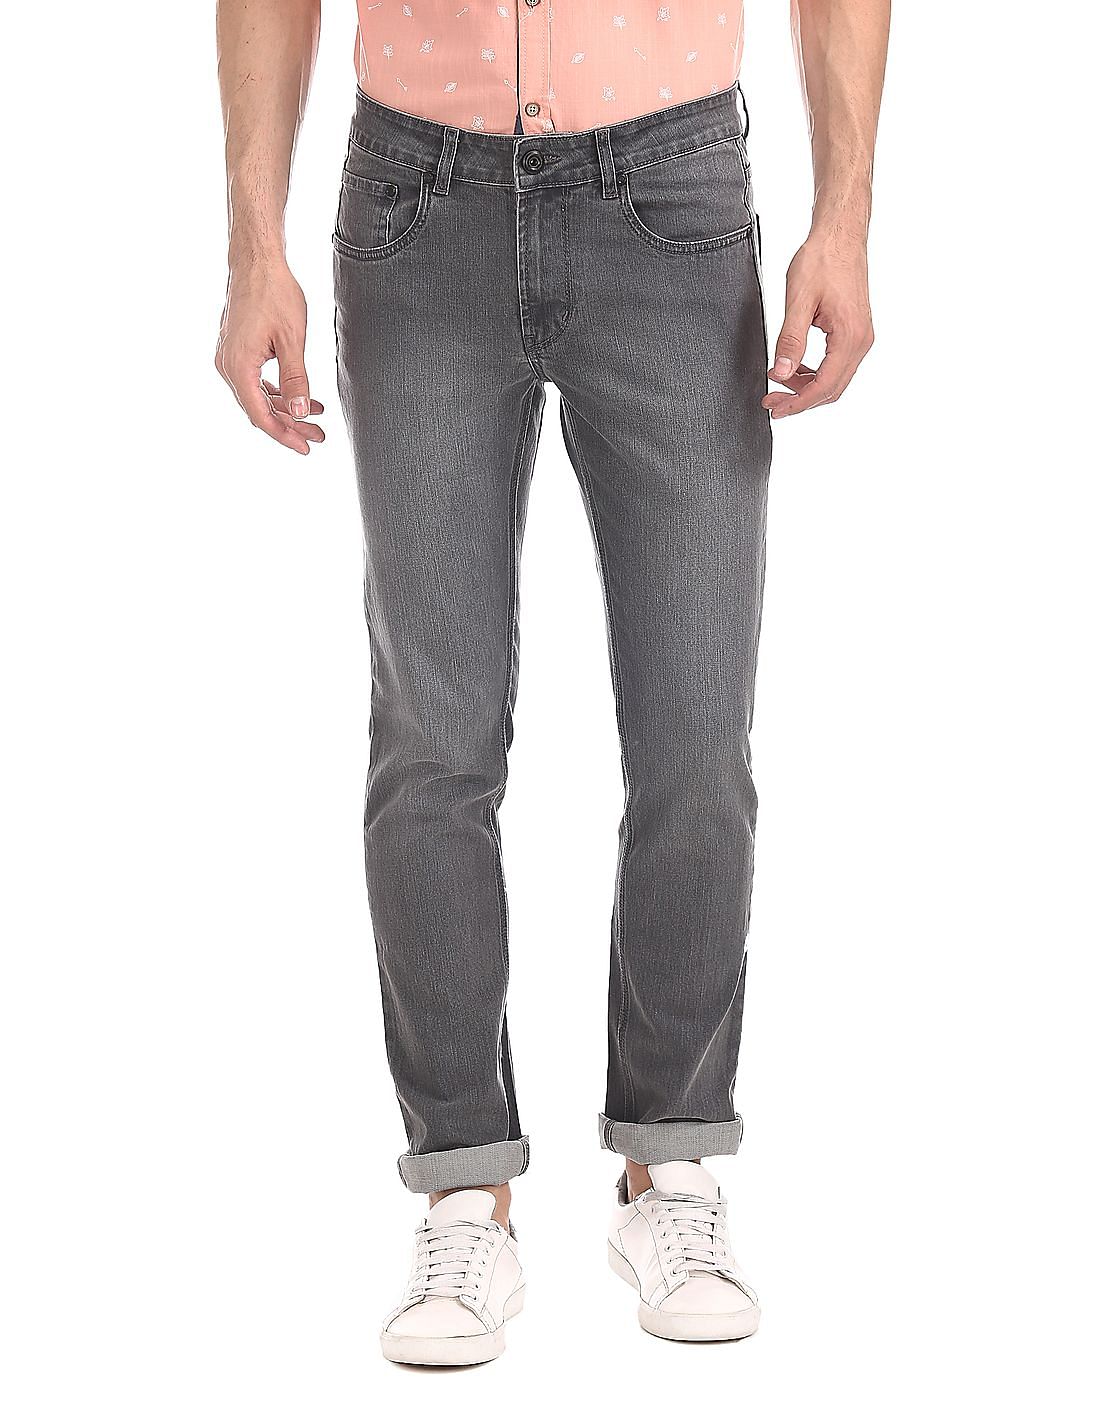 Buy Colt Skinny Fit Washed Jeans - NNNOW.com